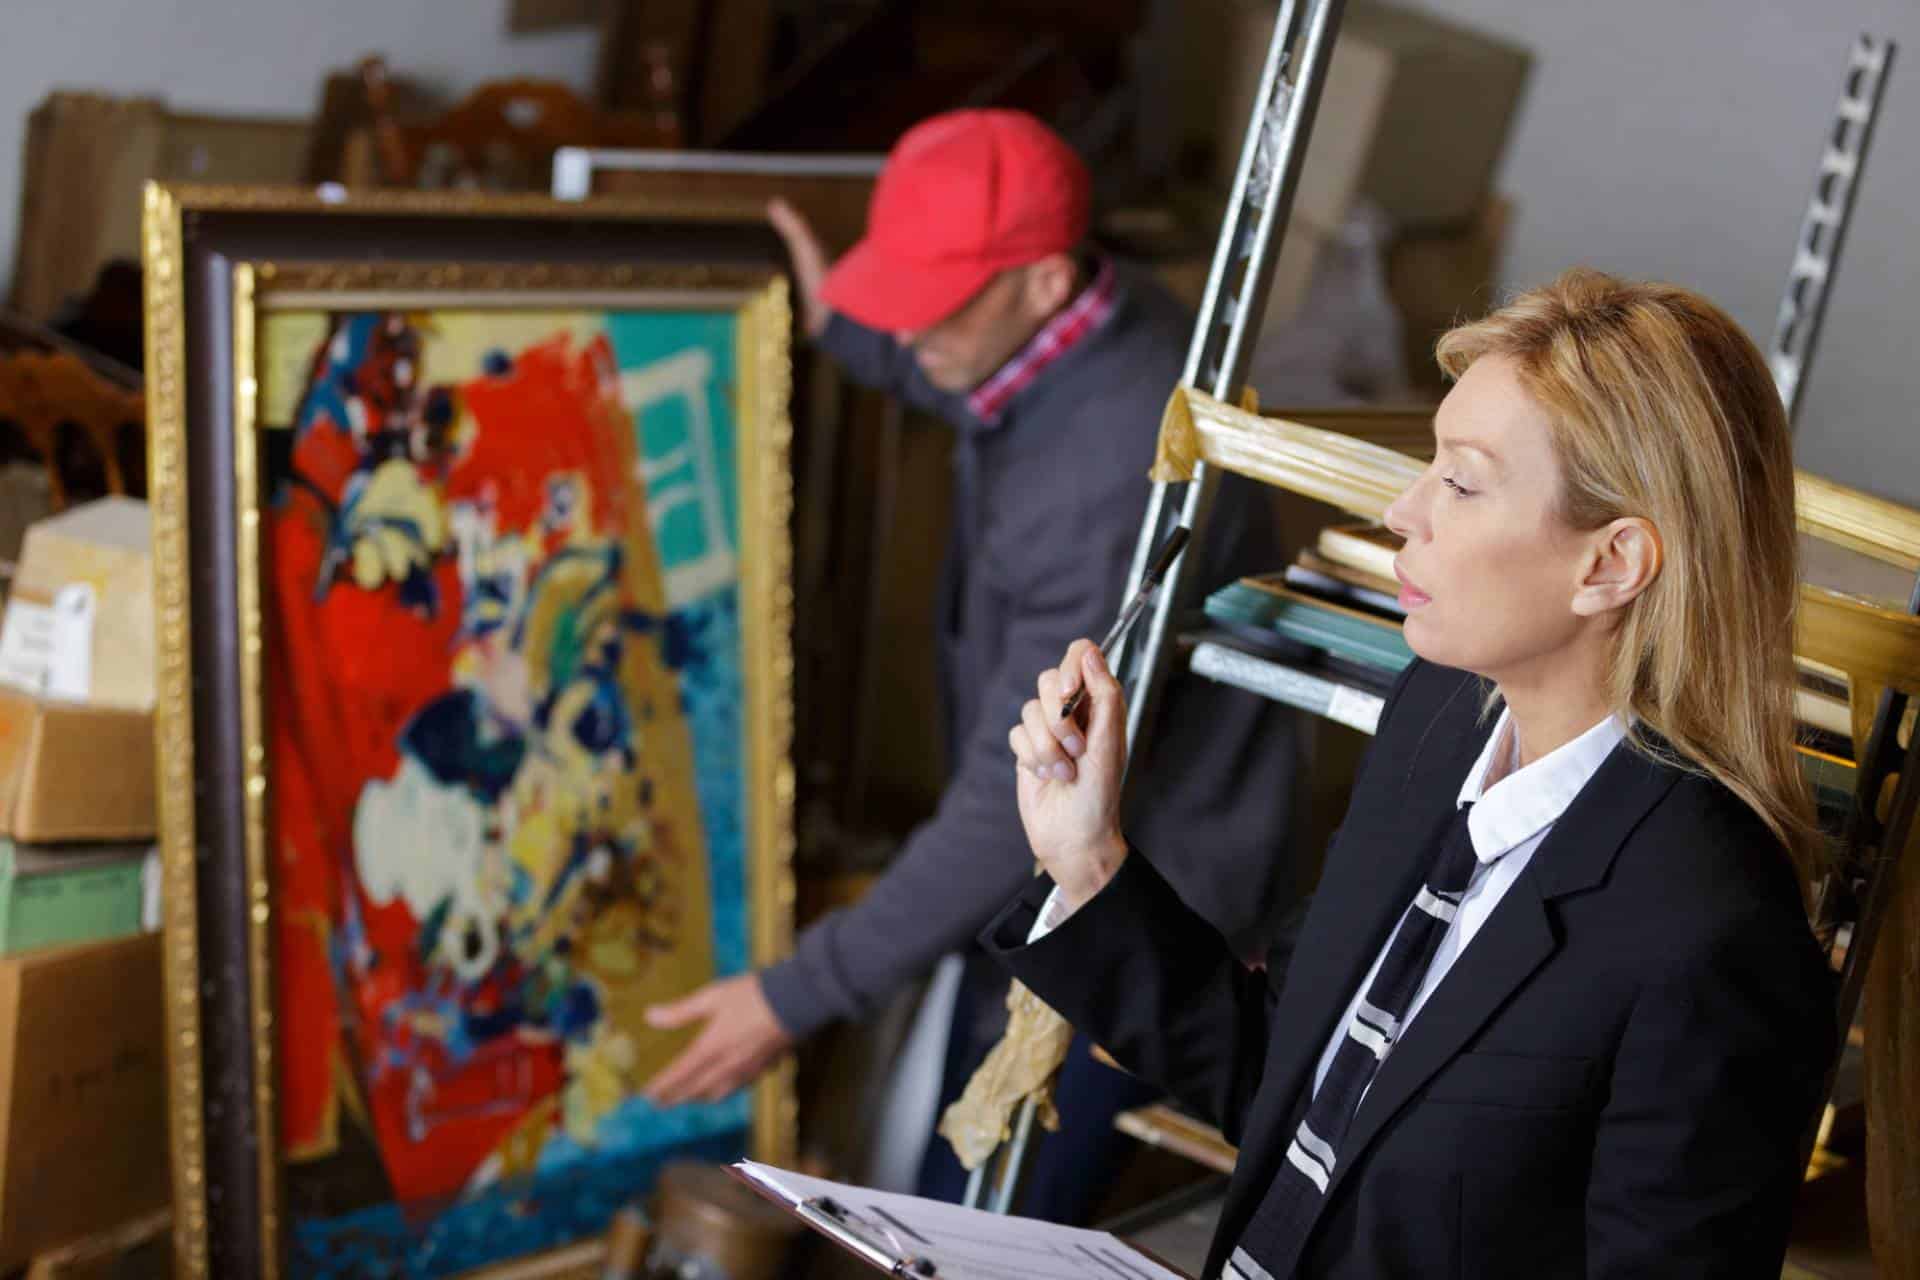 Woman inspecting painting during auction sale.